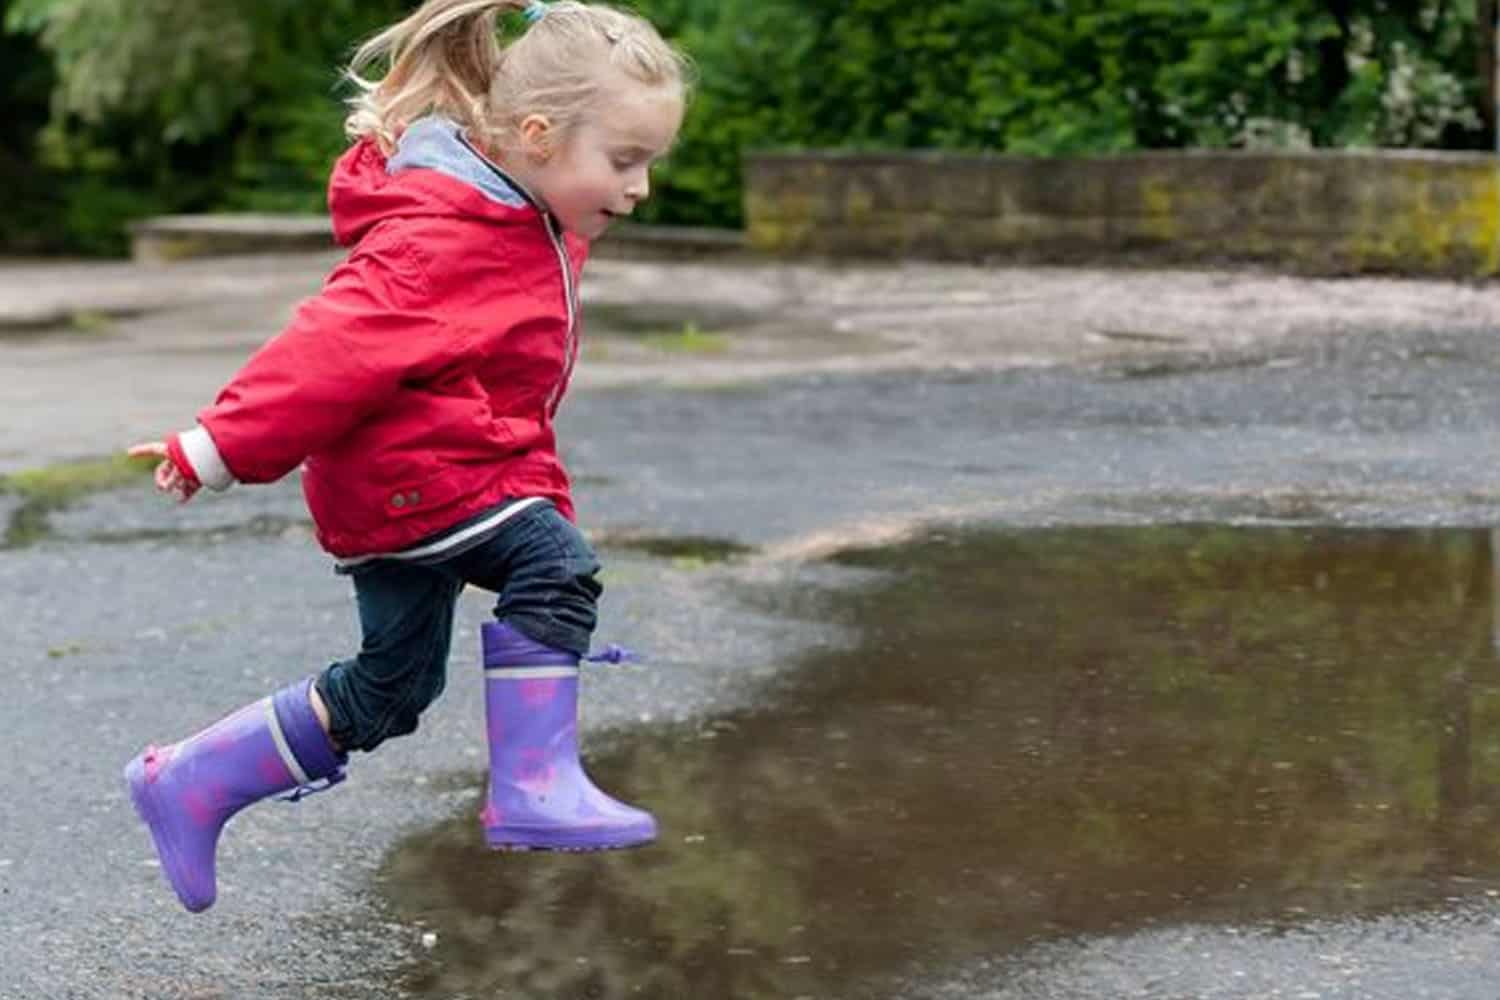 Puddle jumping after the rain